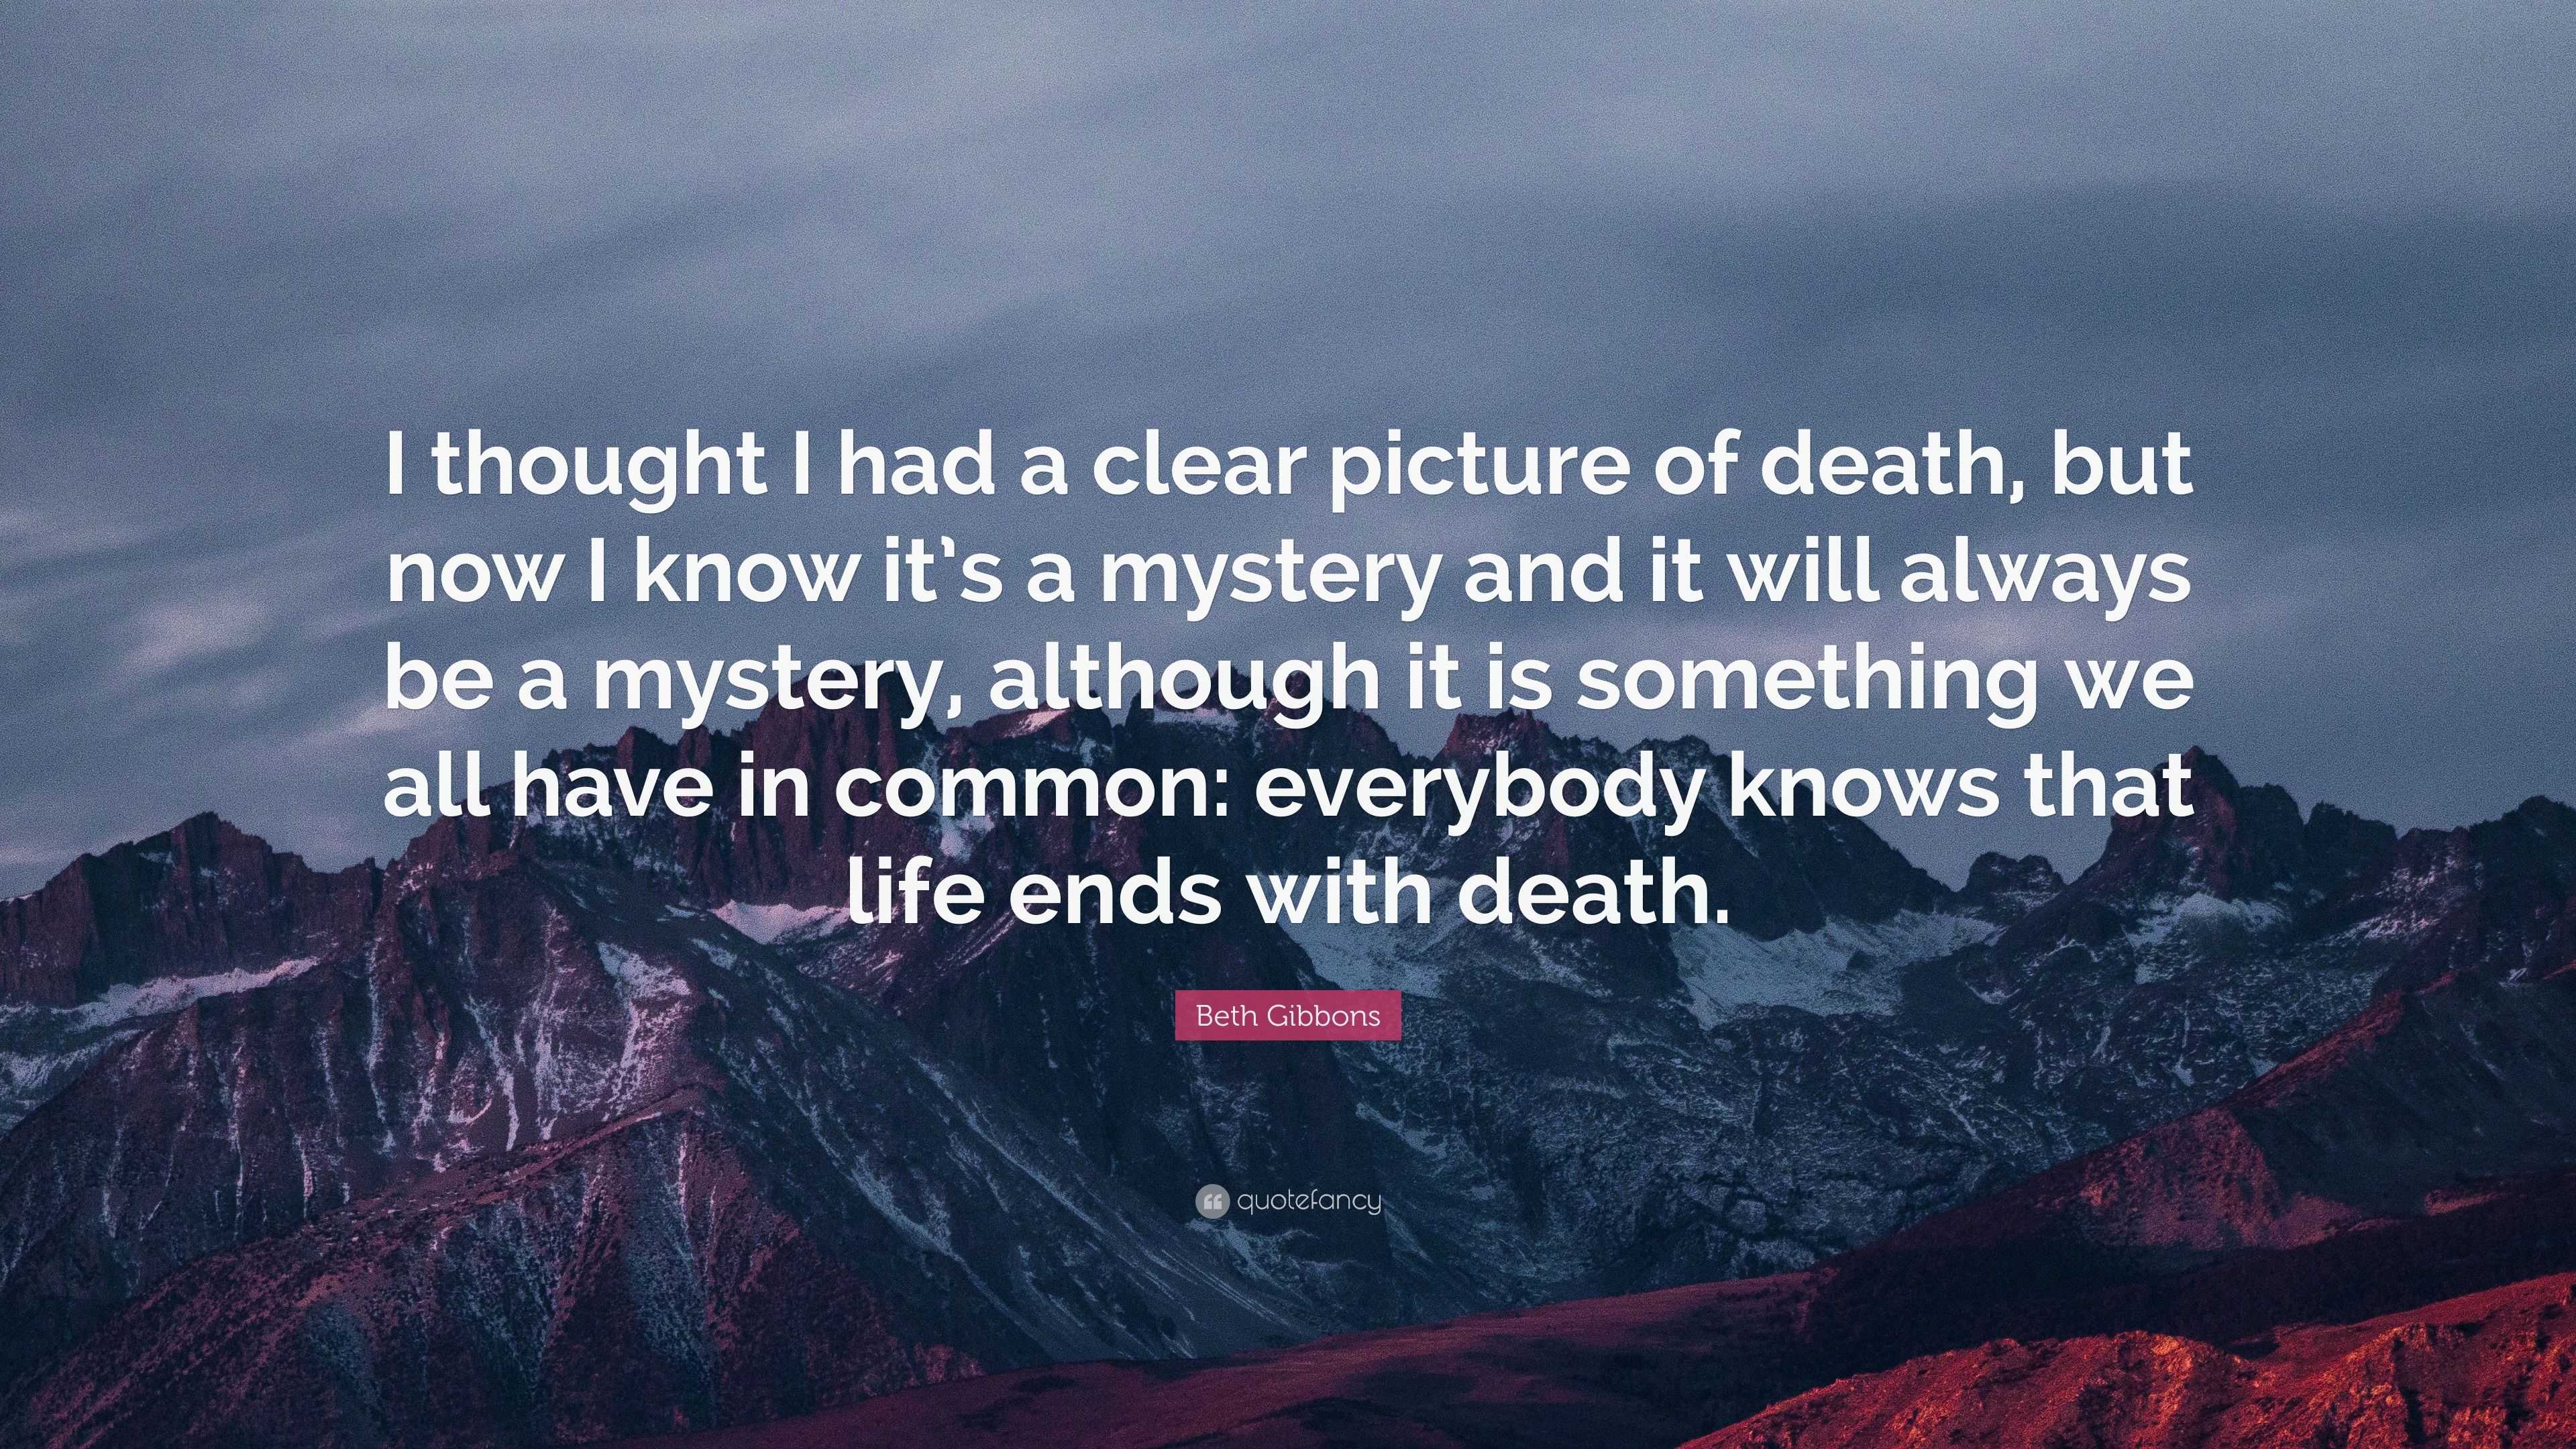 Beth Gibbons Quote: “I thought I had a clear picture of death, but now ...